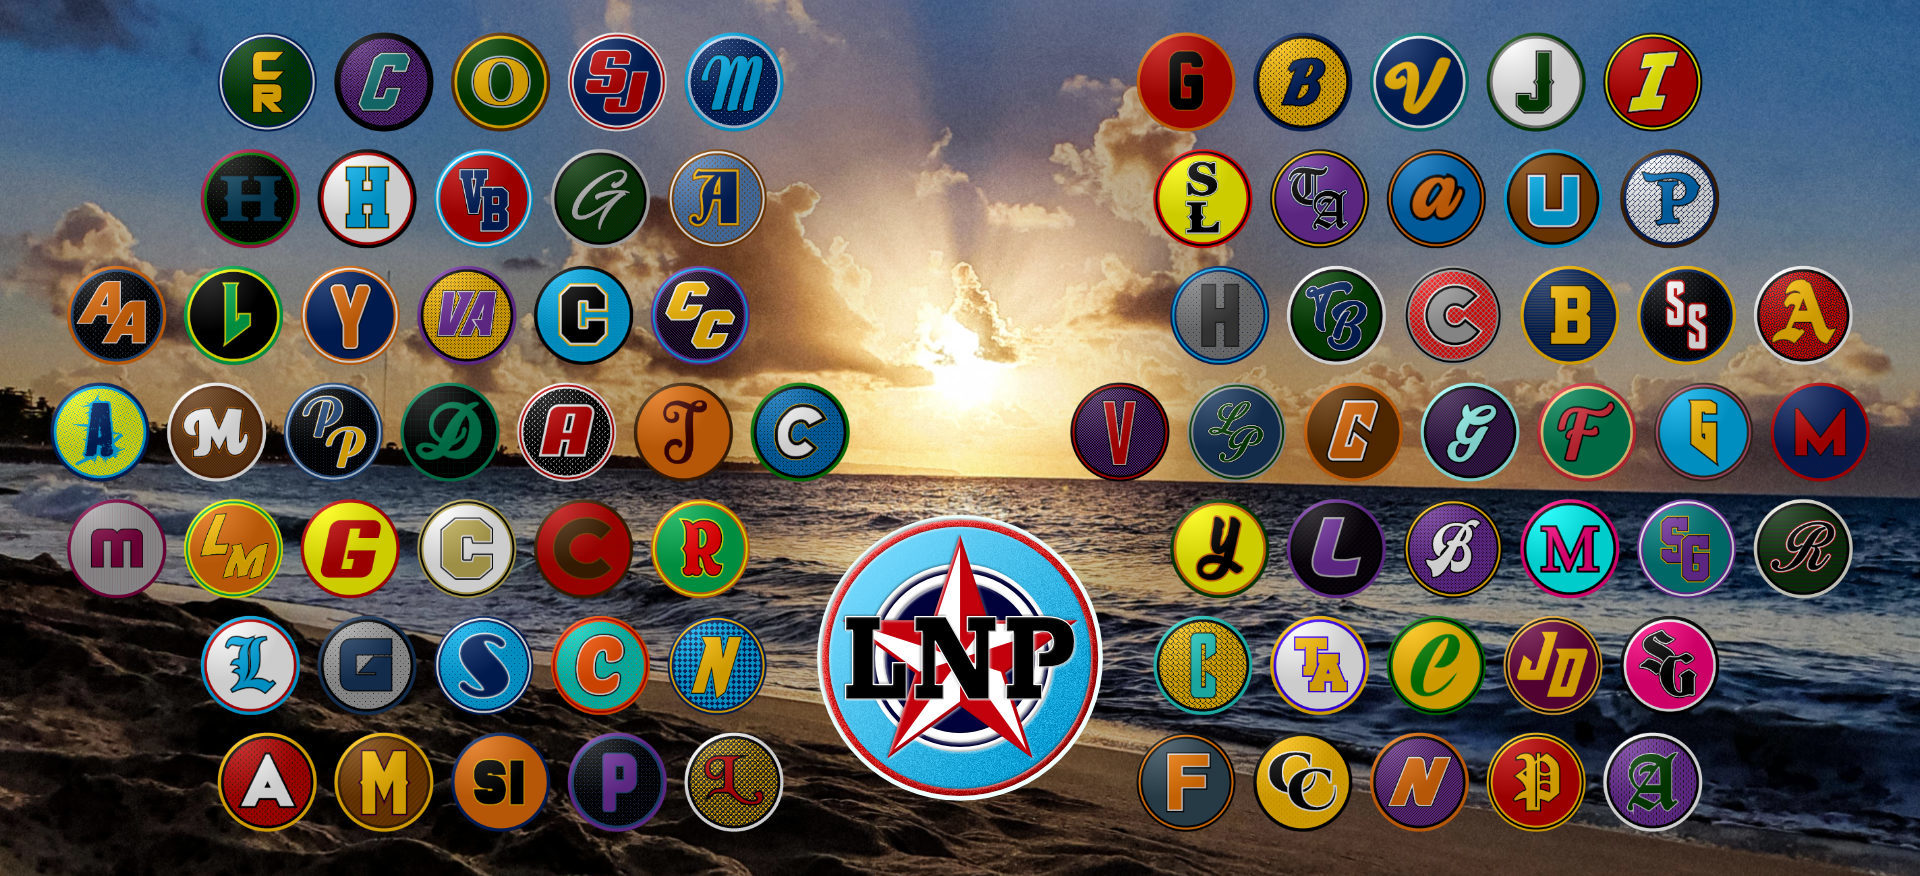 An image of a sunrise at a sandy beach in Aguadilla, on which the logos of all 78 teams of the Liga Nacional Puertorriqueña have been superimposed, along with the logo for the league itself. The logos are divided, with the Liga Betances teams to the left of the sunrise, and the Liga Hostos teams to the right. Each group forms a kind of arrow, with there being 5 teams in the first and second lines, 6 in the third, 7 in the fourth and middle line, 6 in the fifth and 5 in the sixth and seventh. 39 teams are on each side of the sunrise.